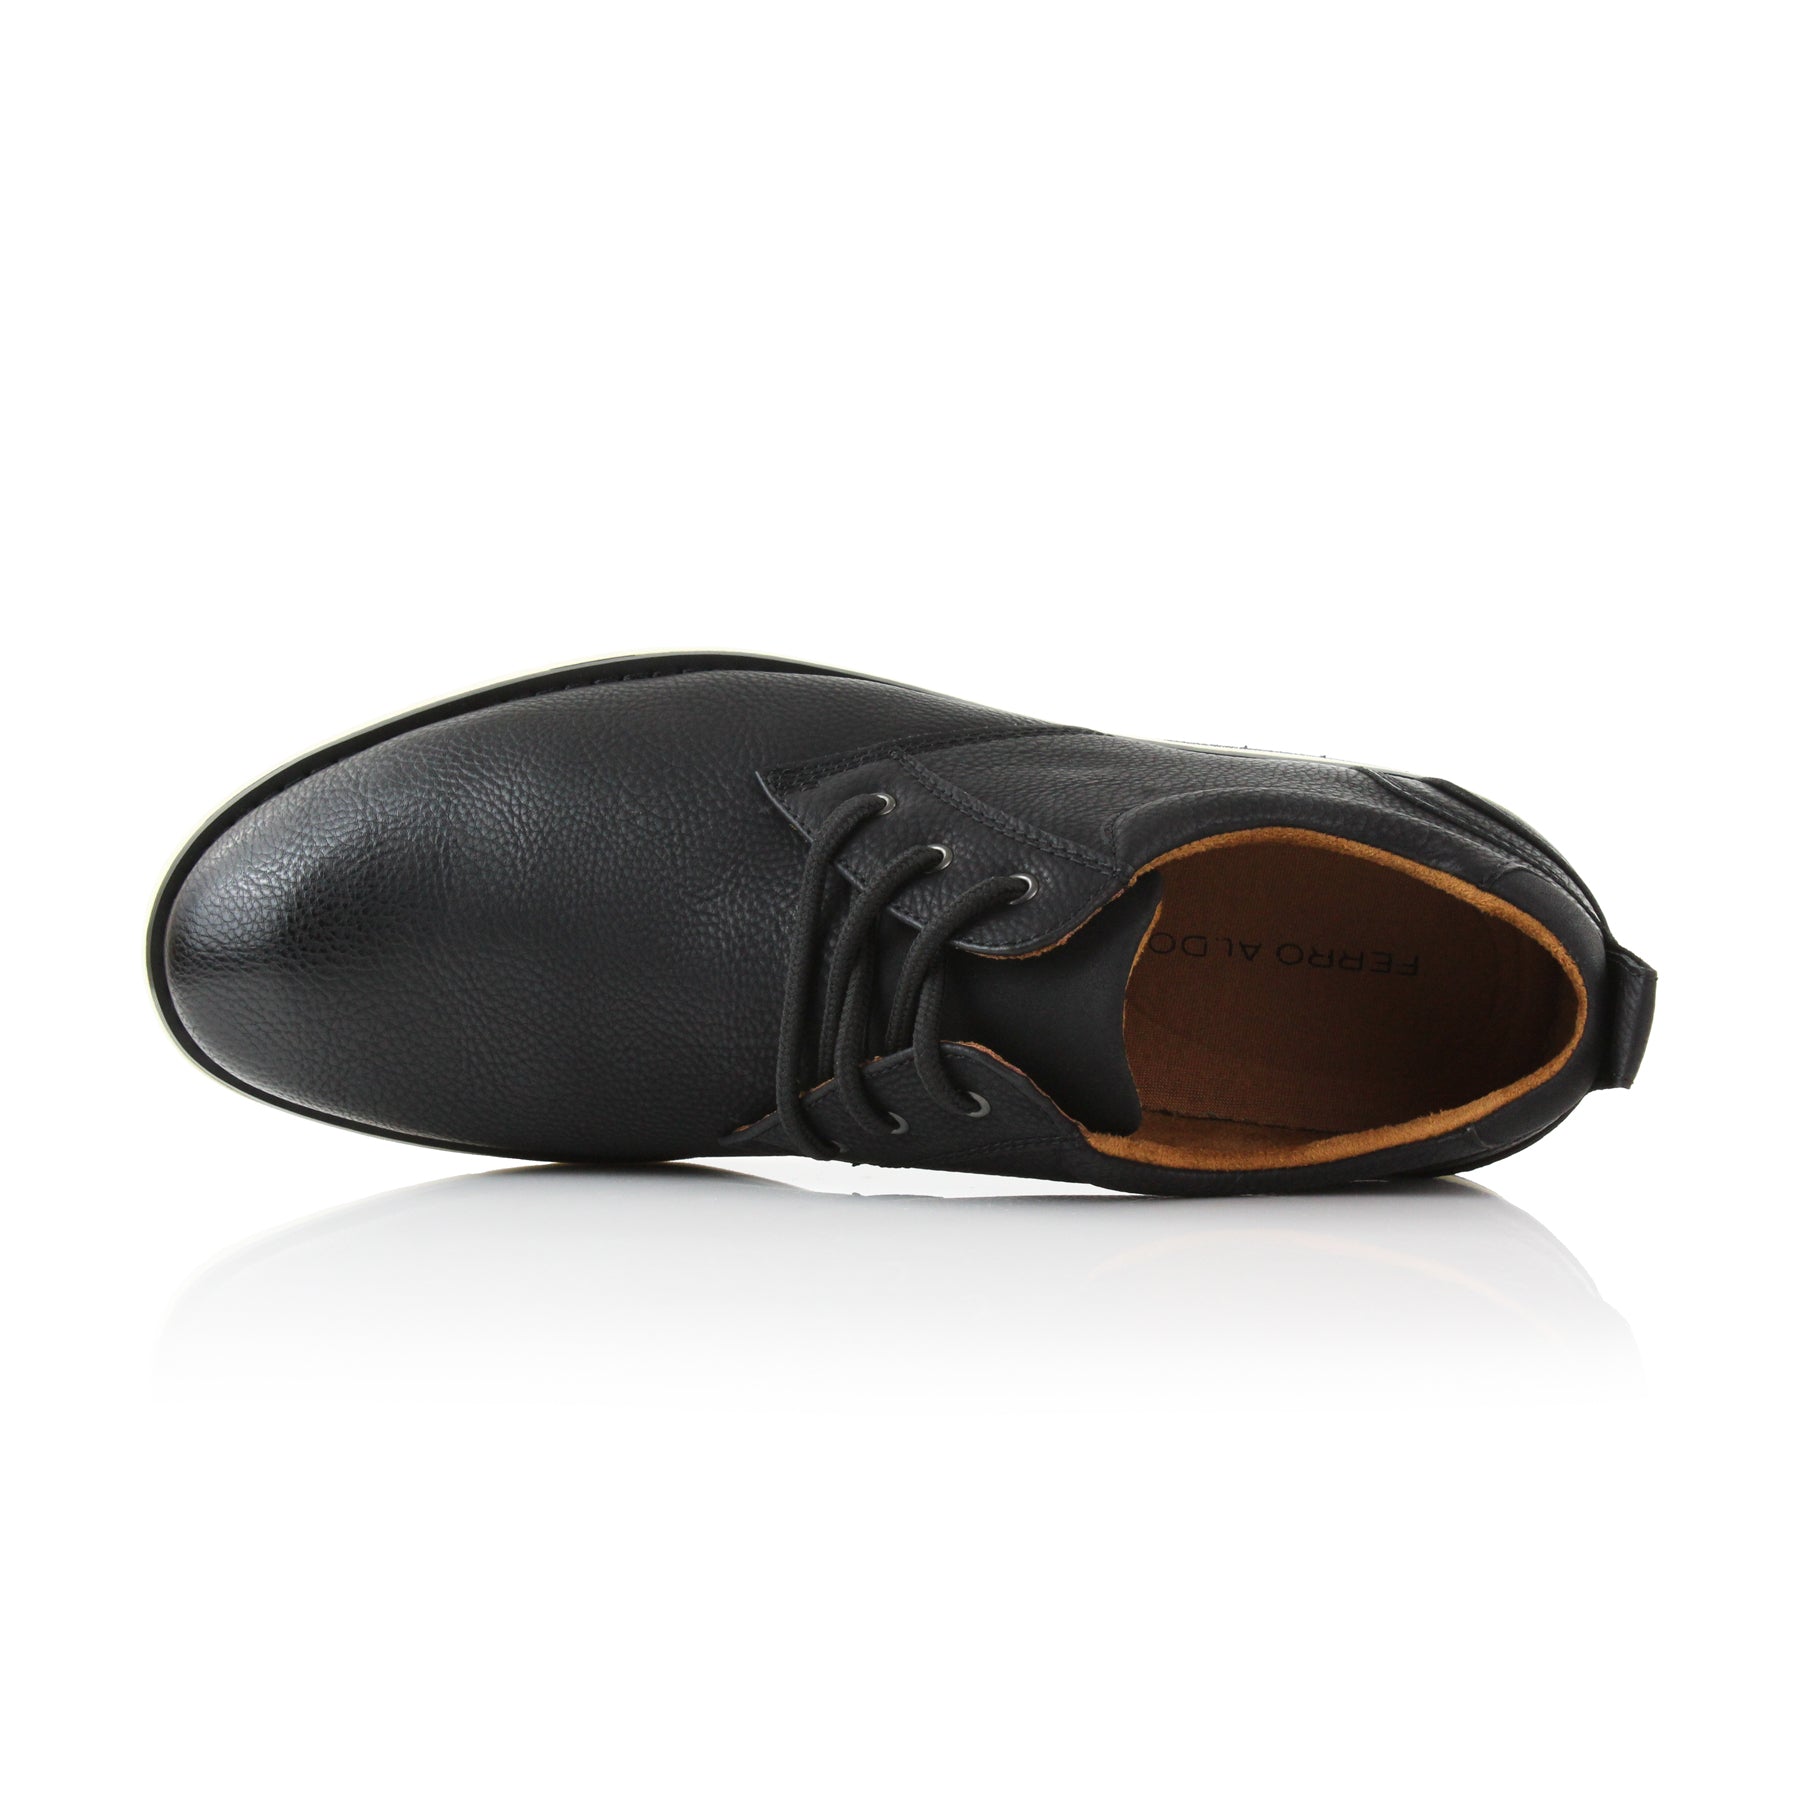 Grained Leather Sneakers | Ayden by Ferro Aldo | Conal Footwear | Top-Down Angle View